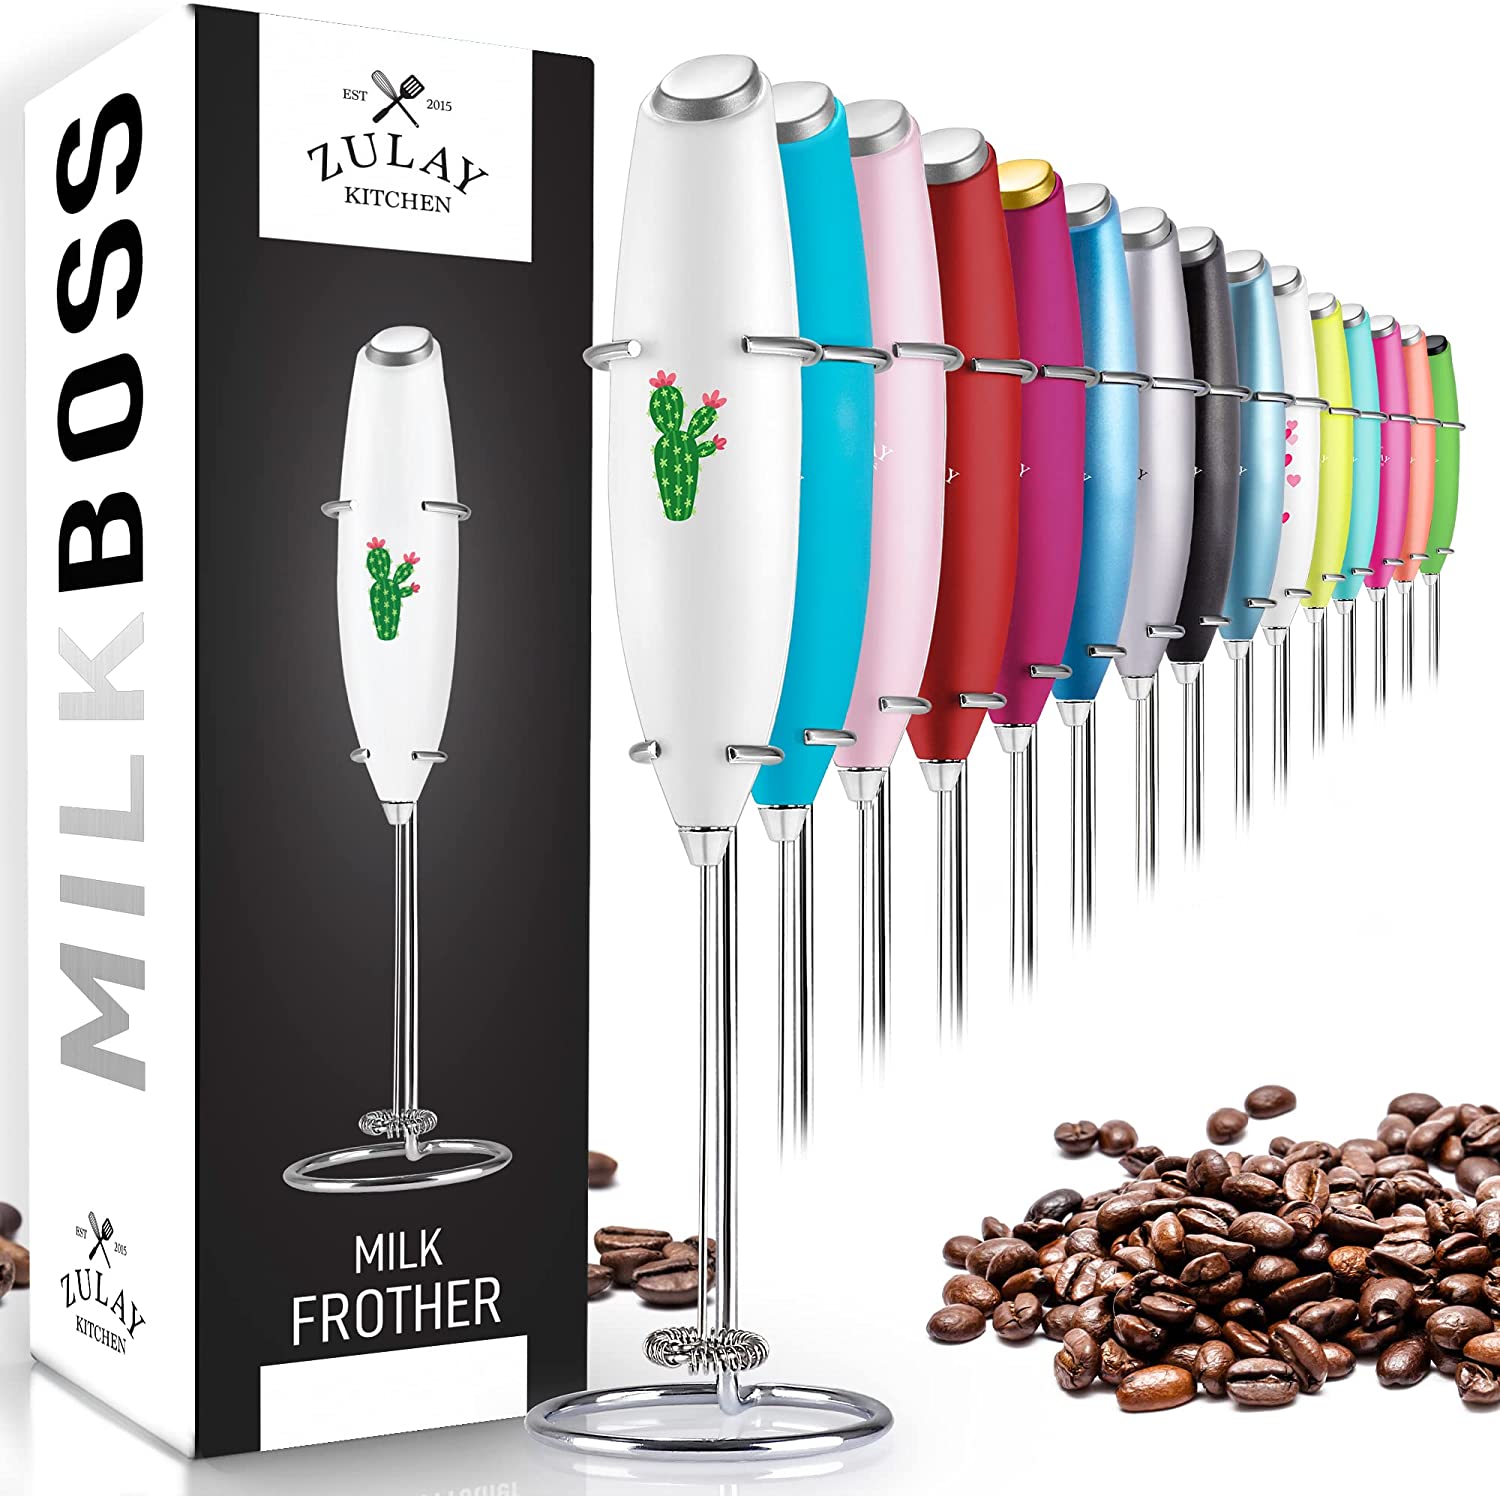 Classic Milk Frother With Stand - Zulay KitchenKitchen & DiningZulay Kitchen